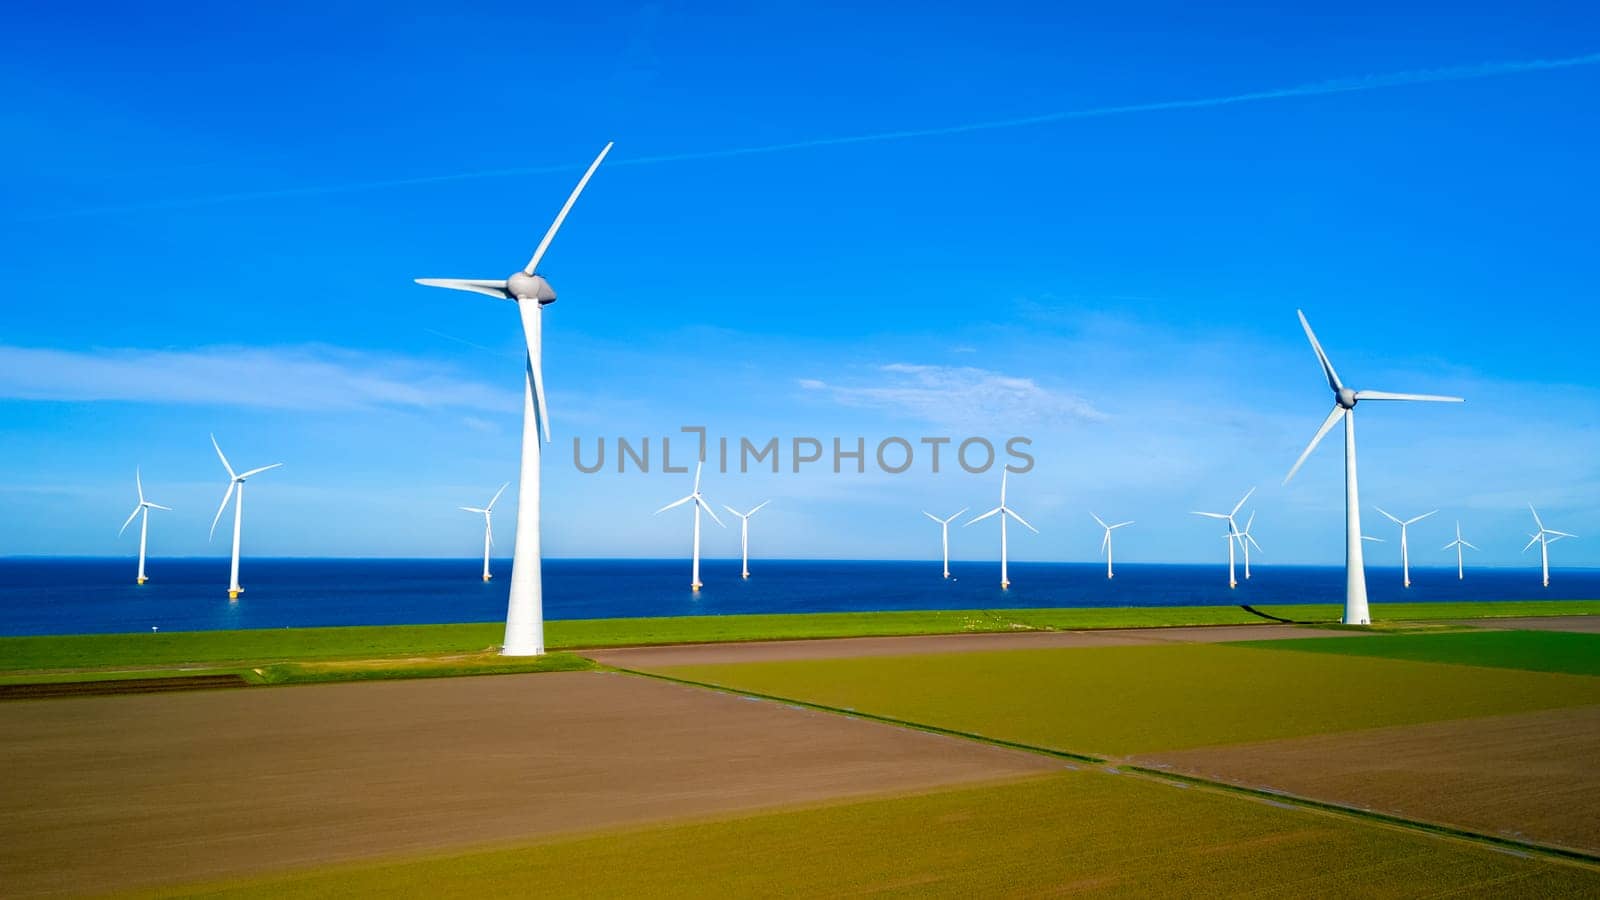 A cluster of windmills stands tall in a field next to the ocean, their blades spinning gracefully in the spring breeze. windmill turbines, green energy, earth day